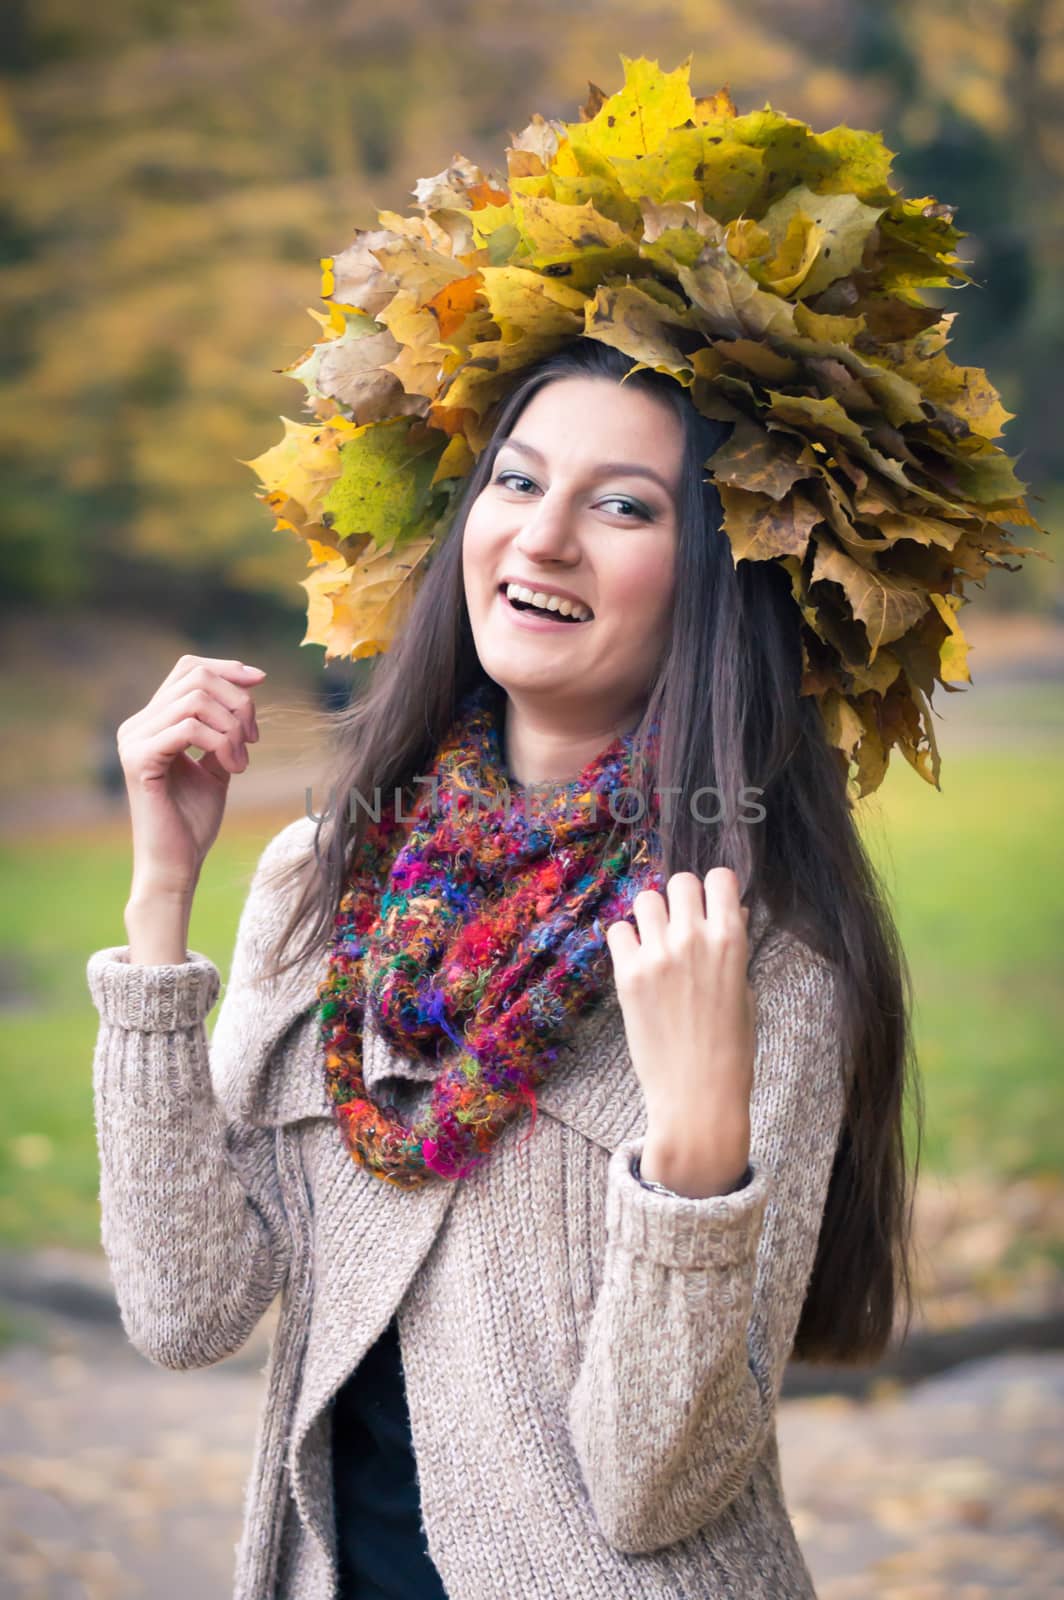 girl with a wreath of leaves in autumn Park